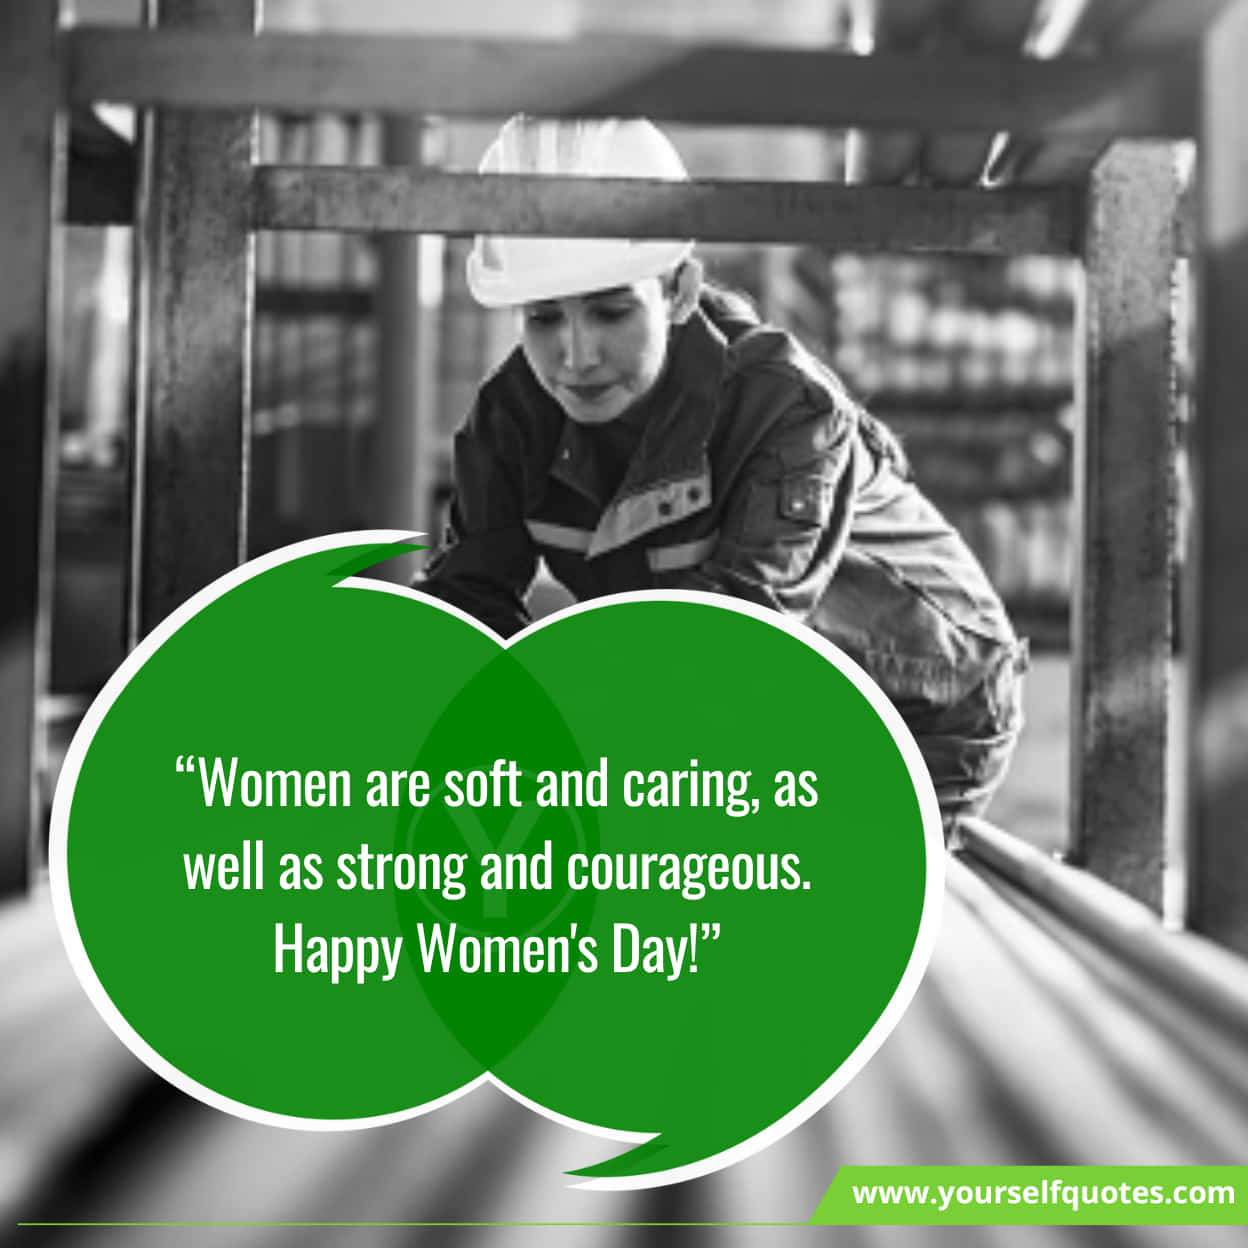 Best Wishes On Women's Day Wishes To Employees